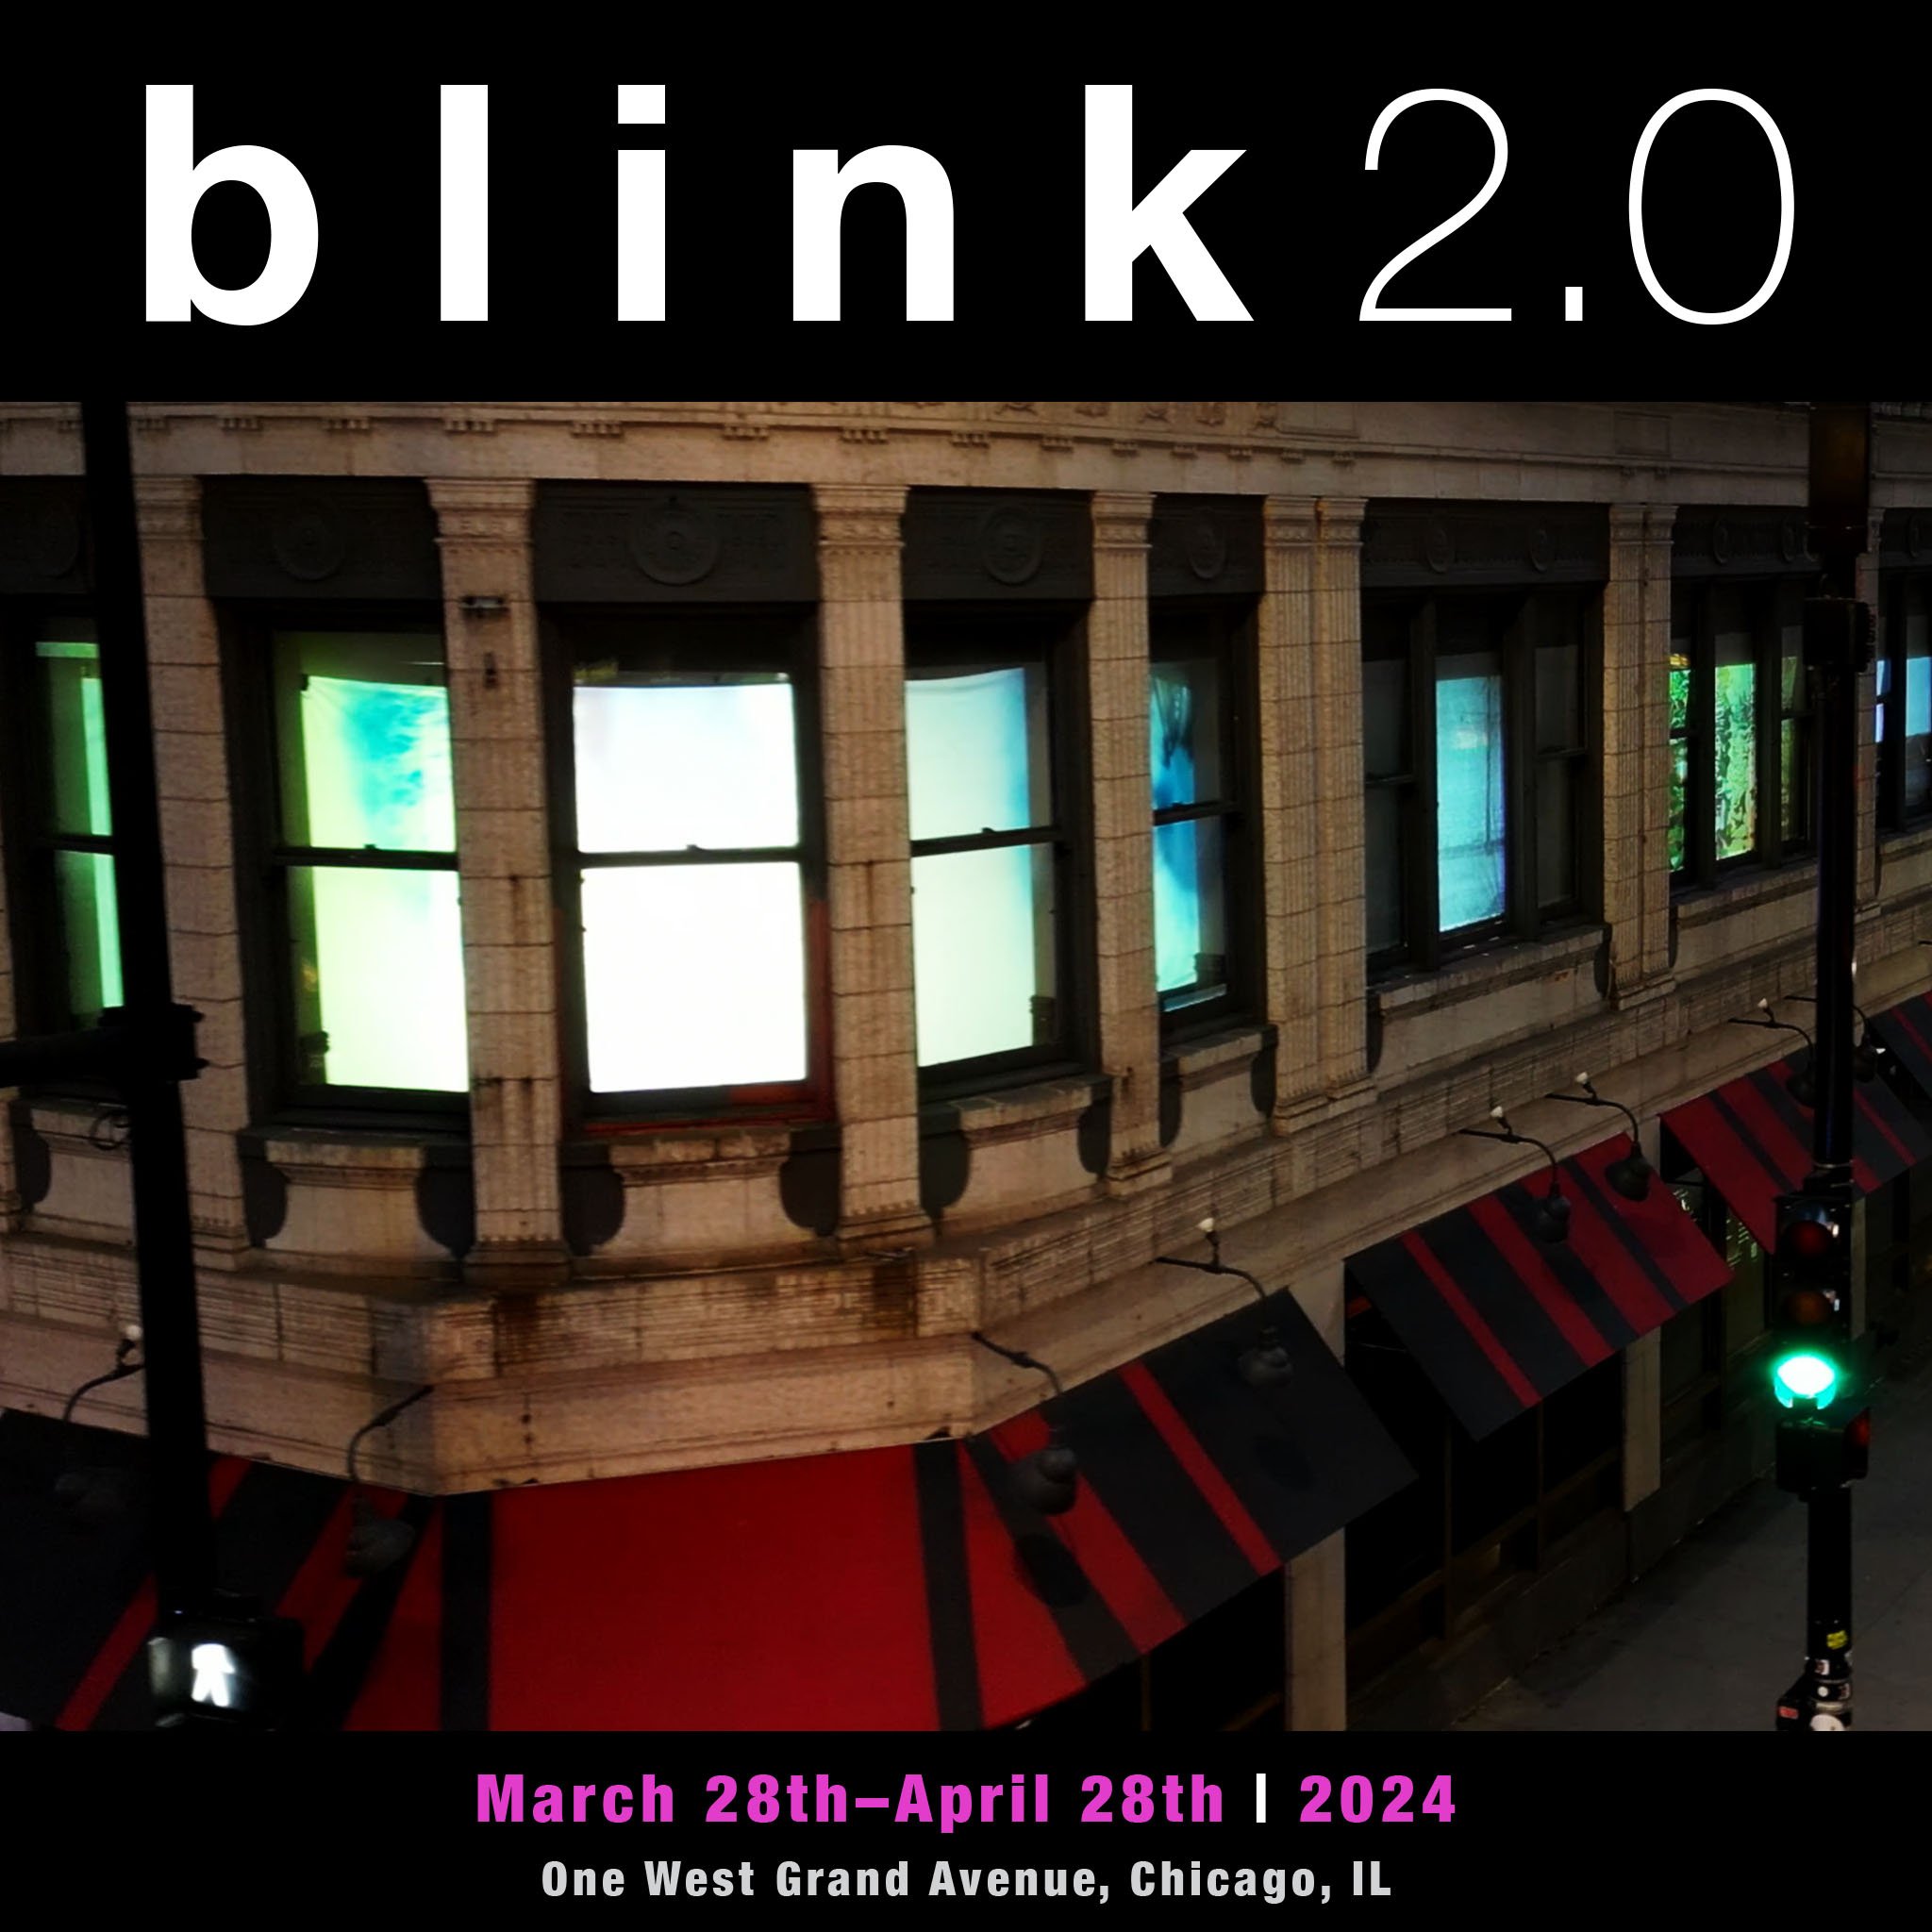  Blink 2.0  March 28-April 28 | 2024 One West Grand Avenue | Chicago, IL  b l i n k 2.0 is free and open to the public from sunset to midnight March 28-April 28, 2024. The best views of the exhibition are from the sidewalks across the street at the c